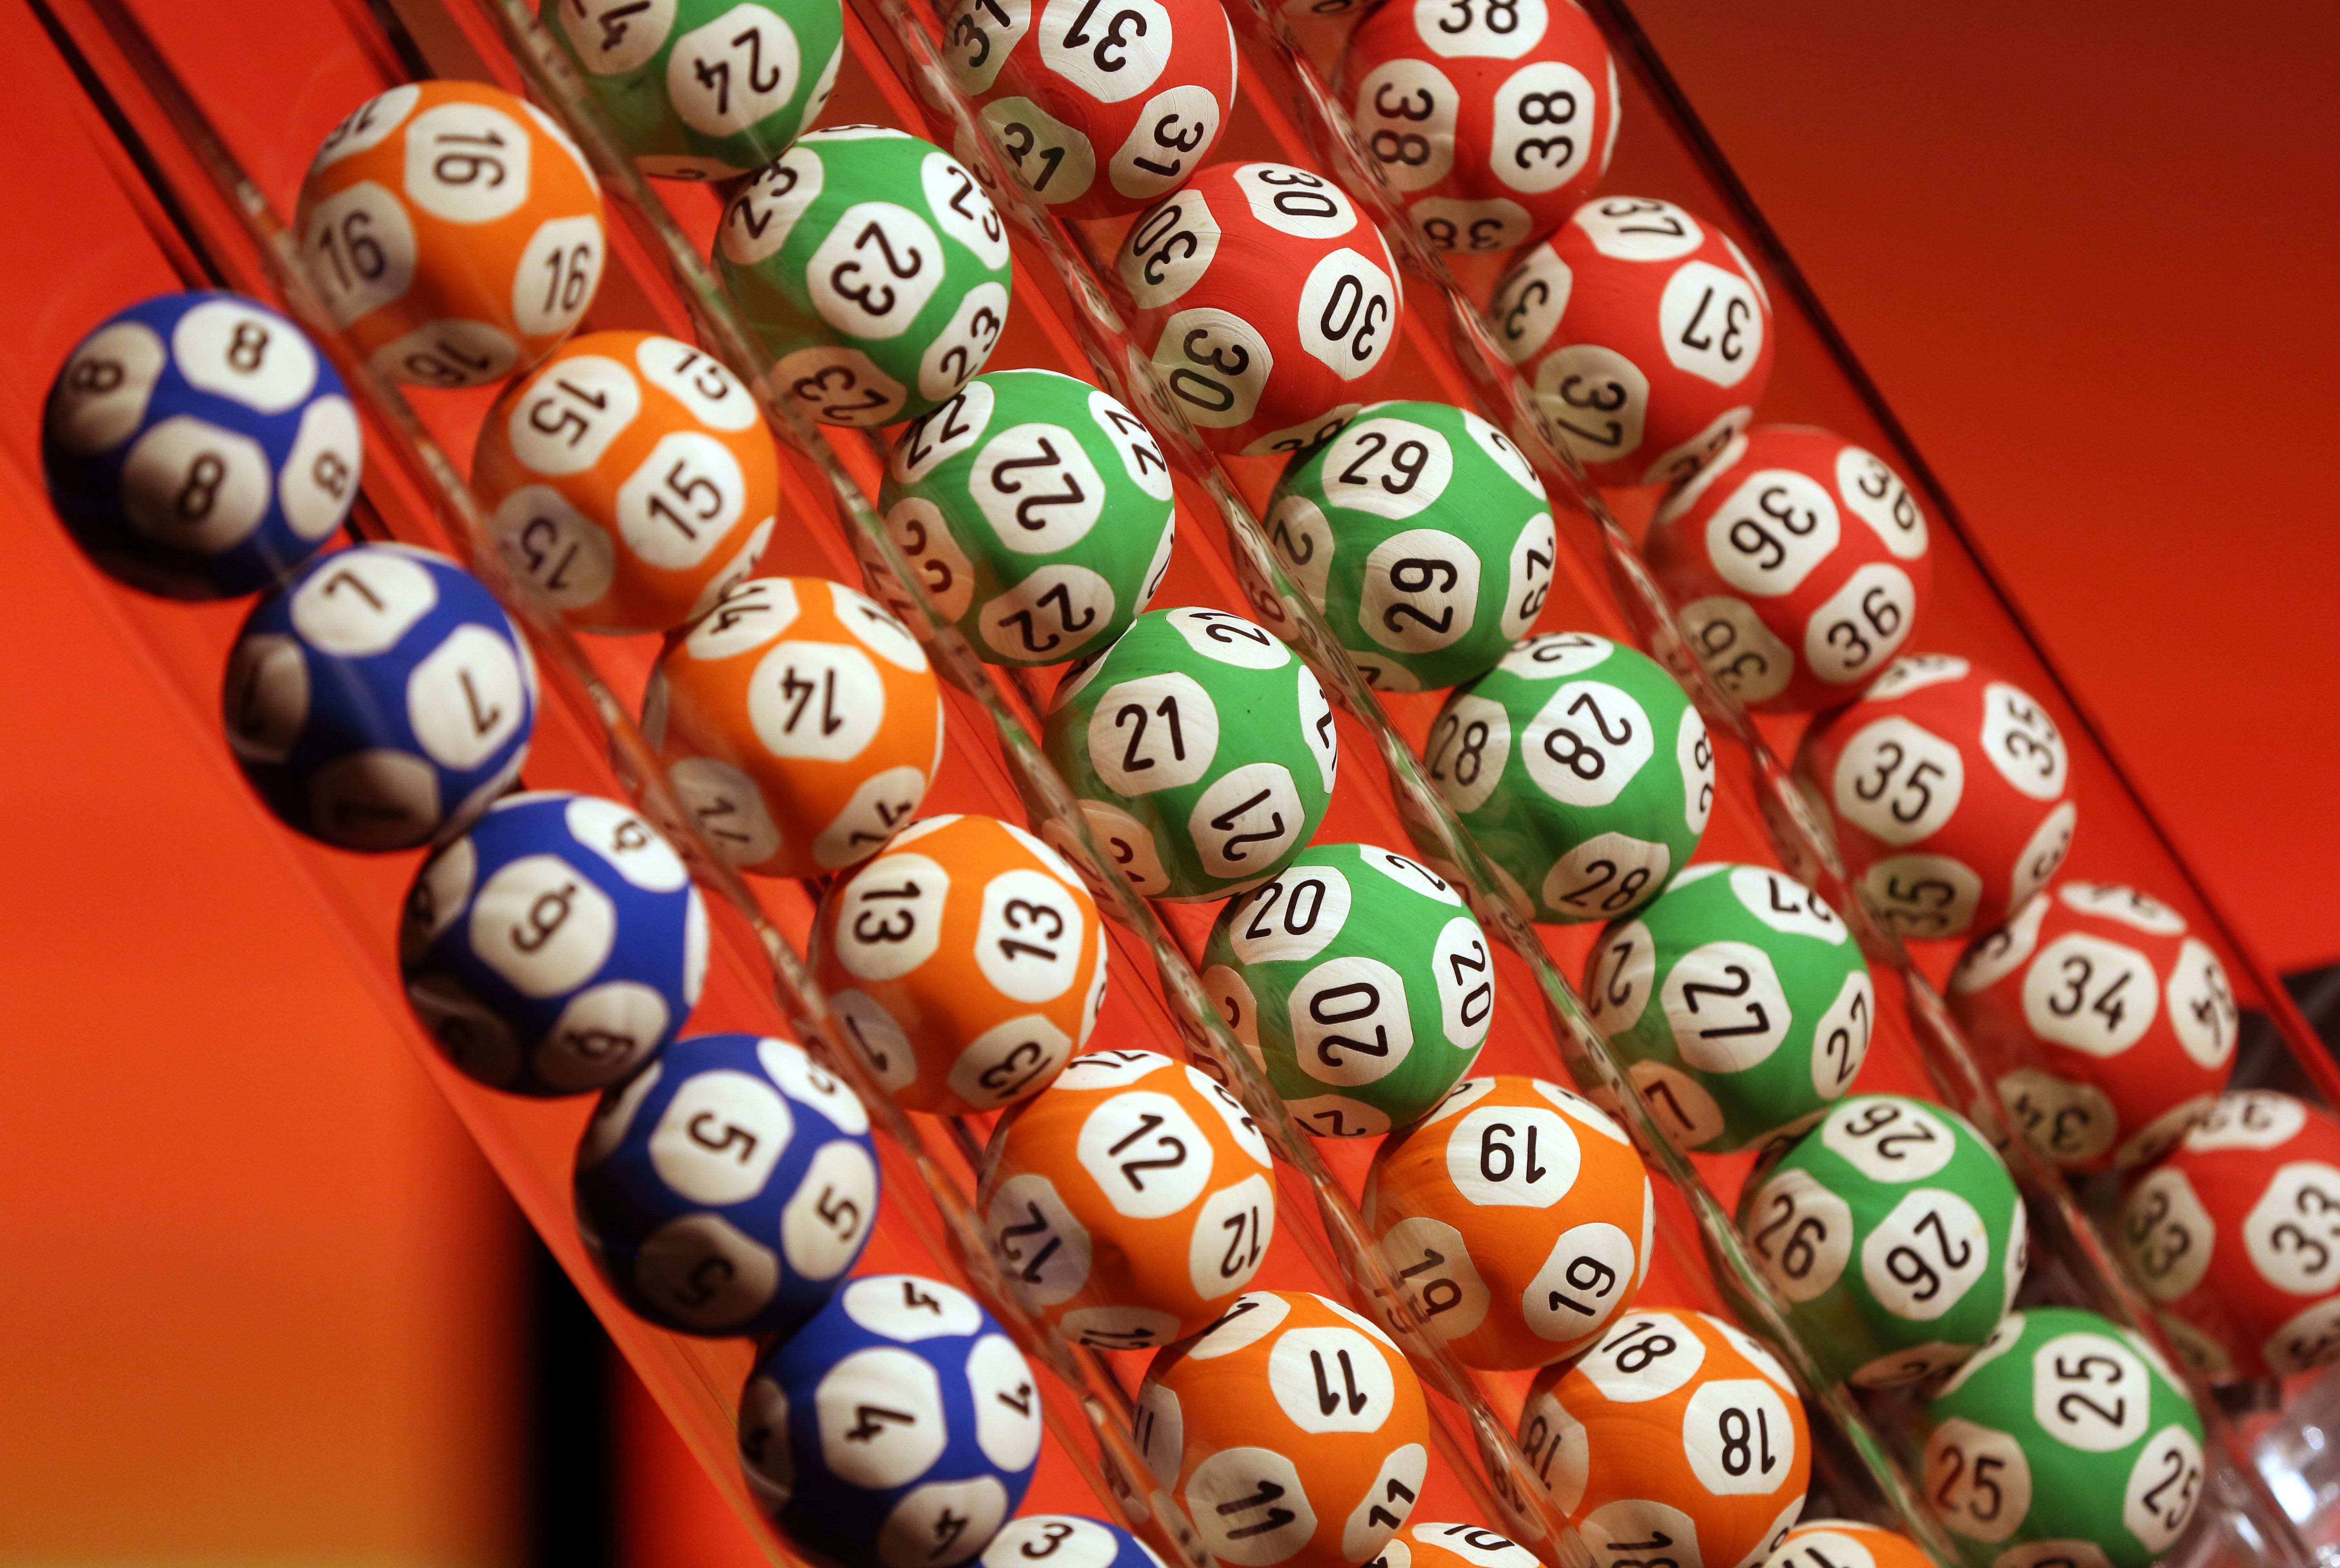 Lotto: $23 million Powerball jackpot continues to elude players - NZ Herald